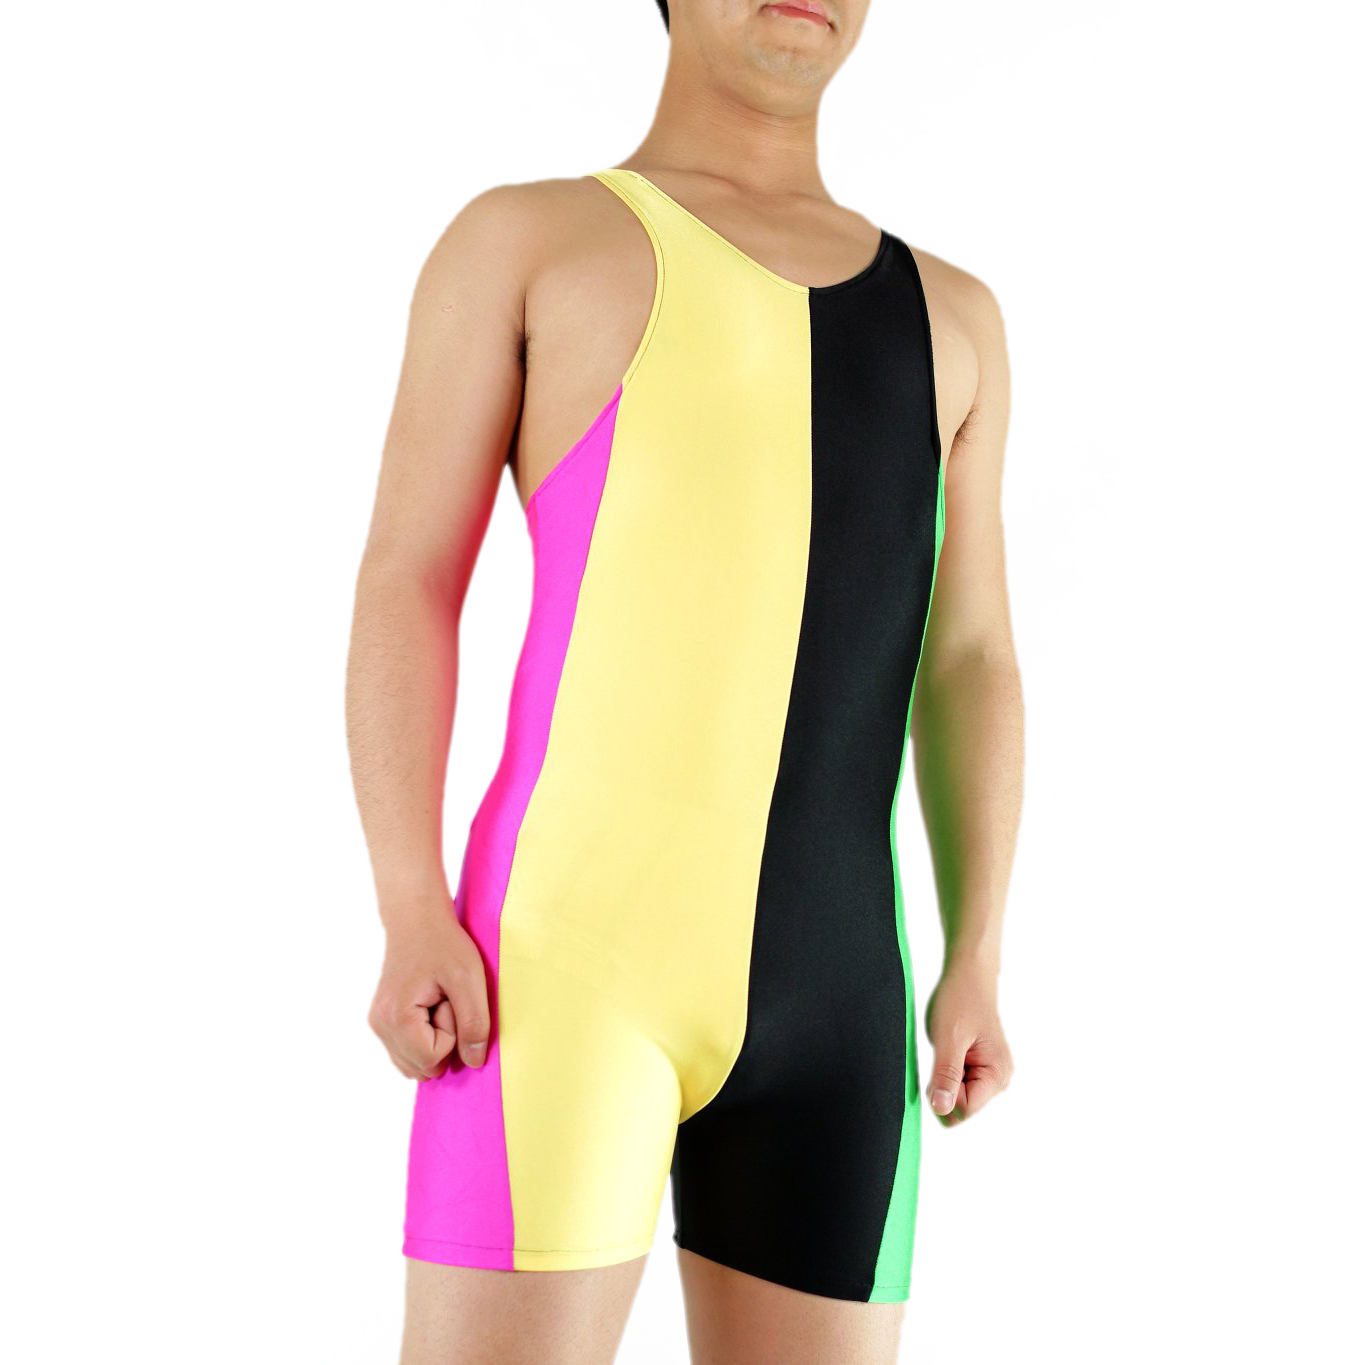 Men's Jumpsuit-styled Multicolor Lycra Spandex Sleeveless Catsui - Click Image to Close